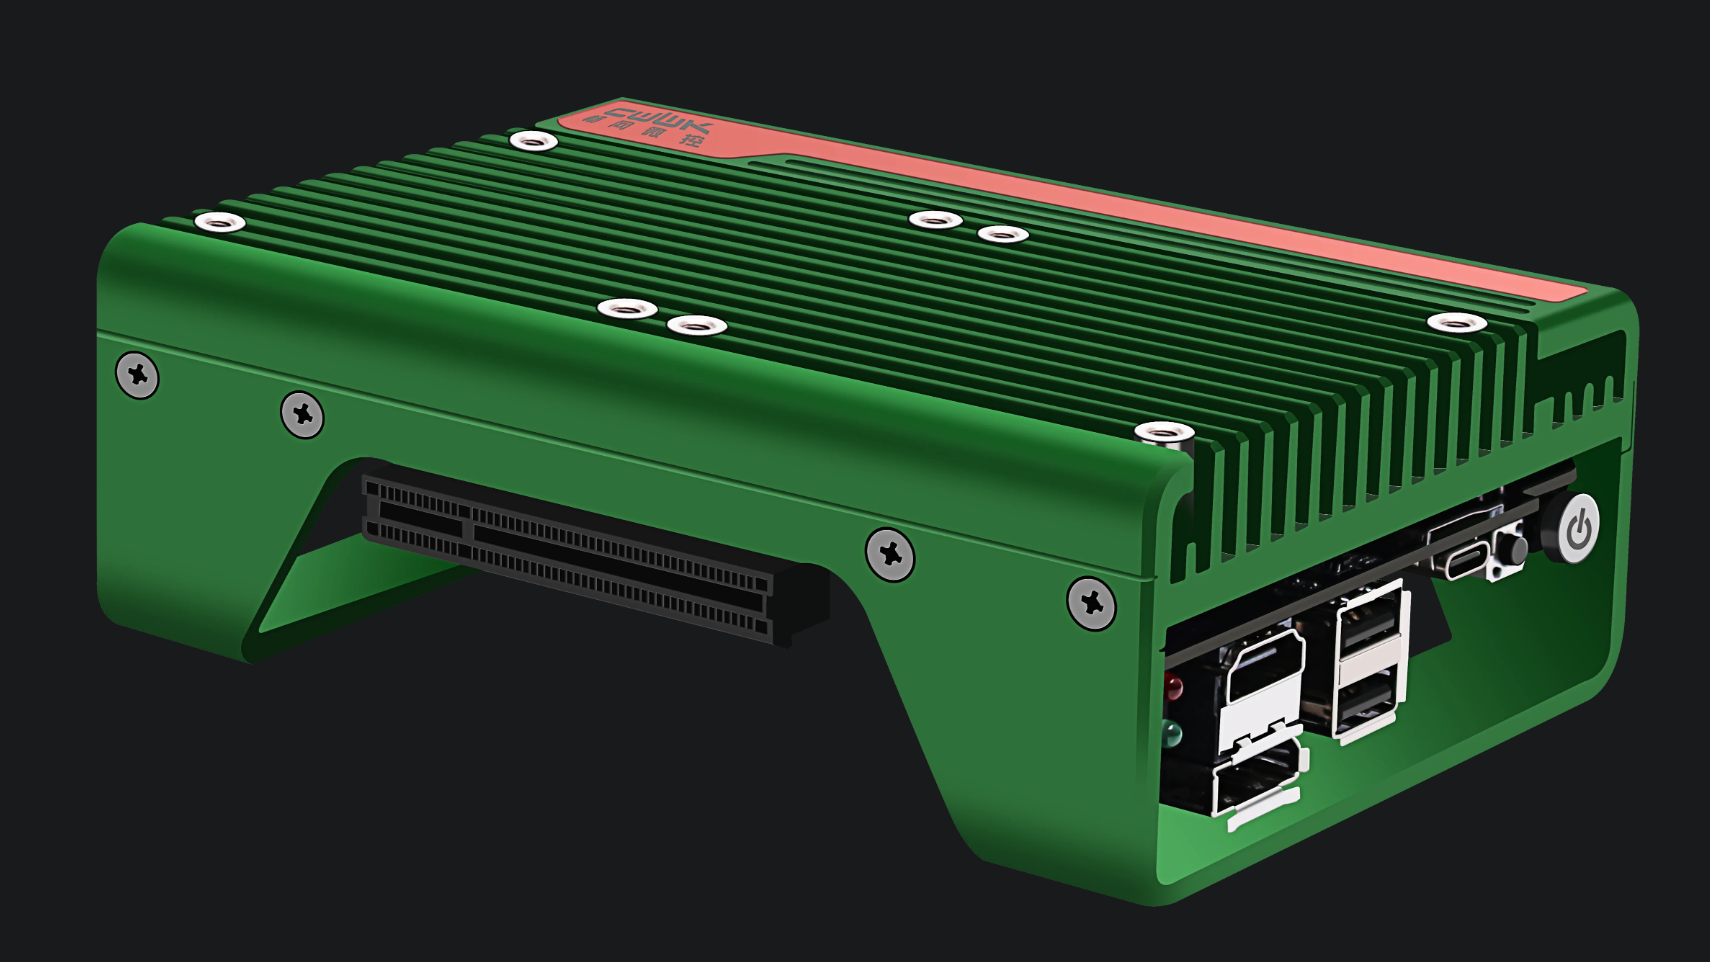 Chinese Mini PC offers external PCIe slot - and an interesting inverted U form factor